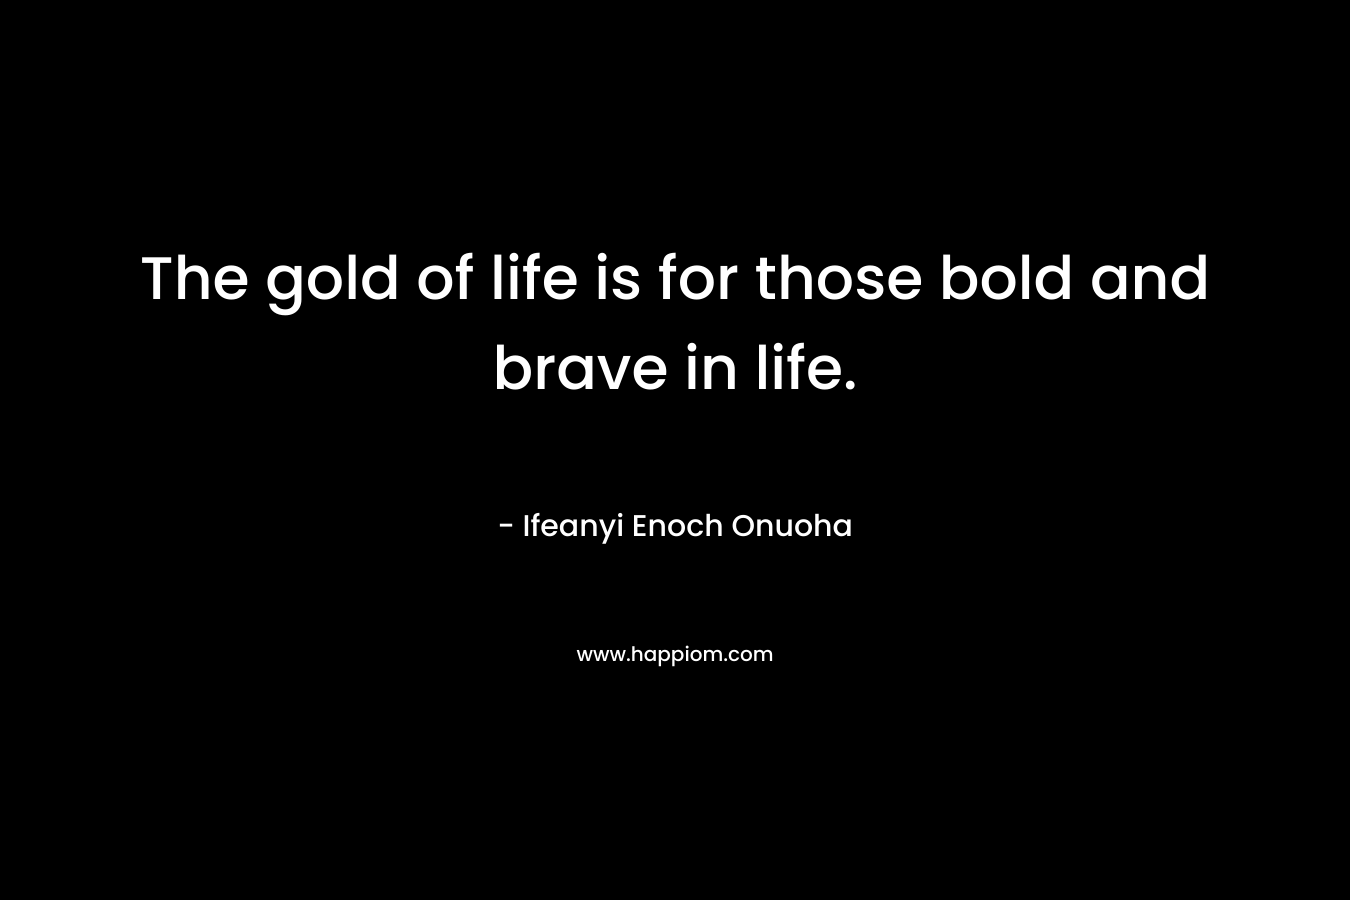 The gold of life is for those bold and brave in life.